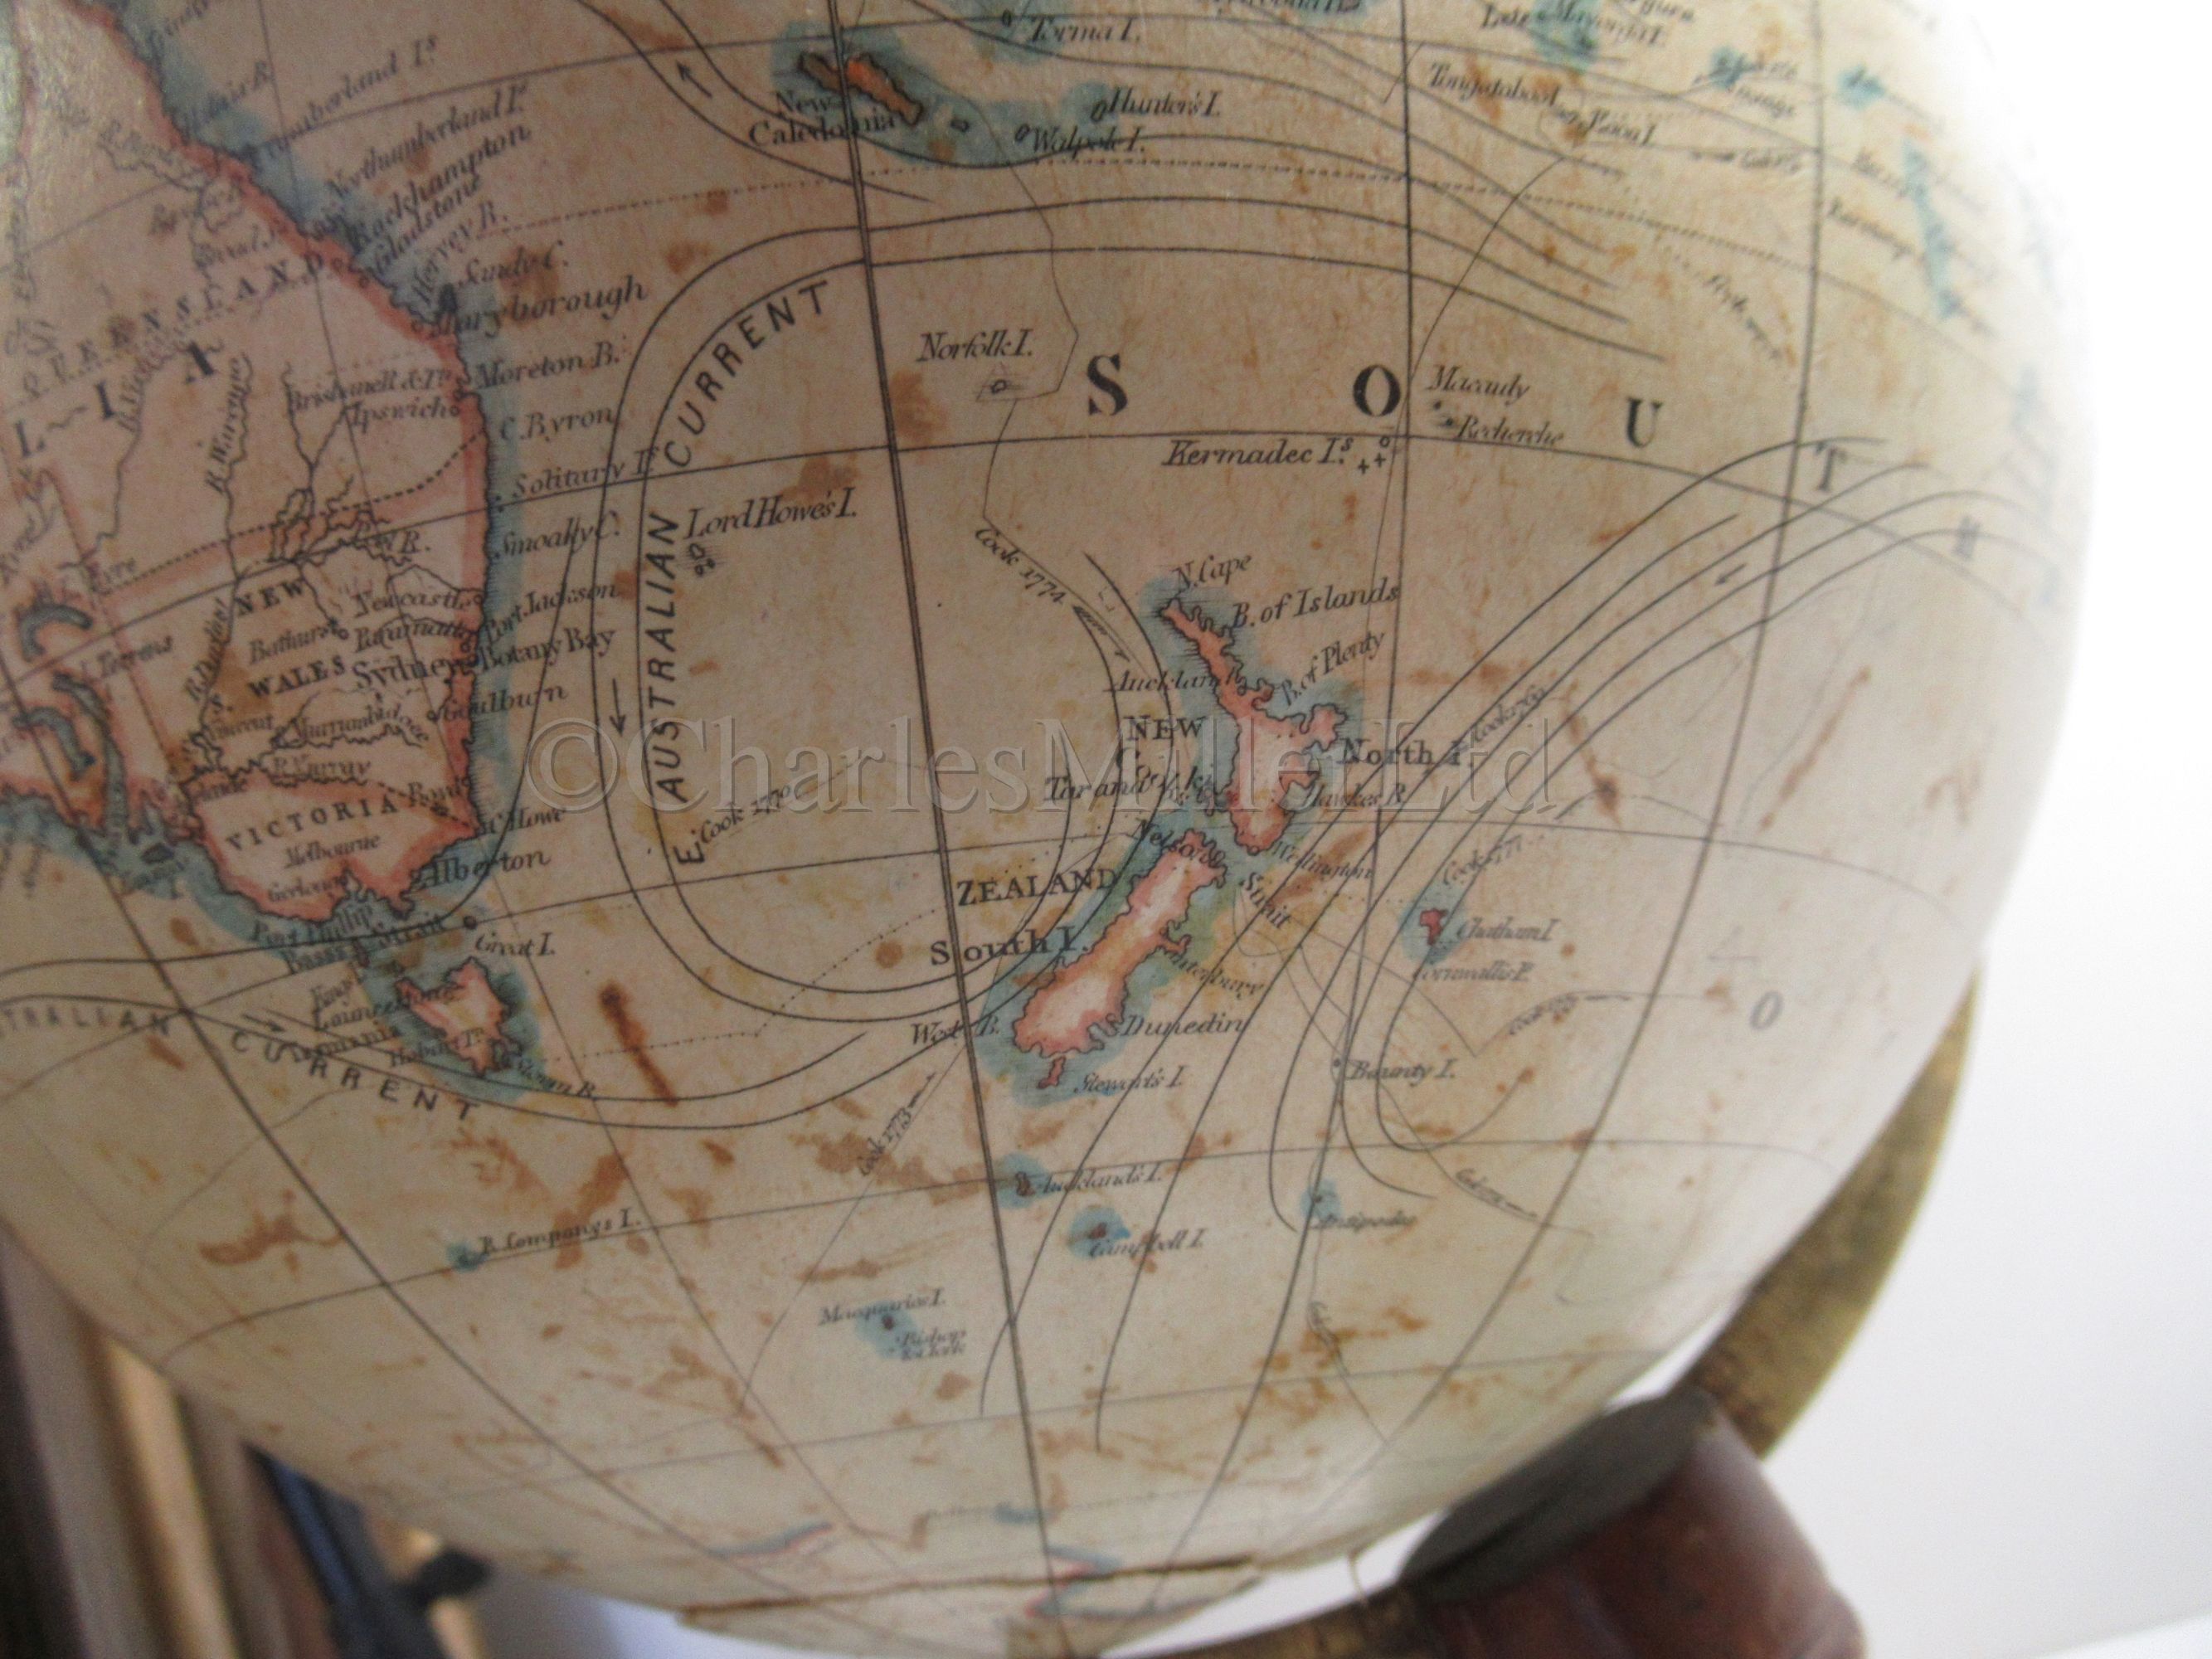 A 10IN. TERRESTRIAL GLOBE BY C. SMITH & SON, LONDON. CIRCA 1890 - Image 8 of 12